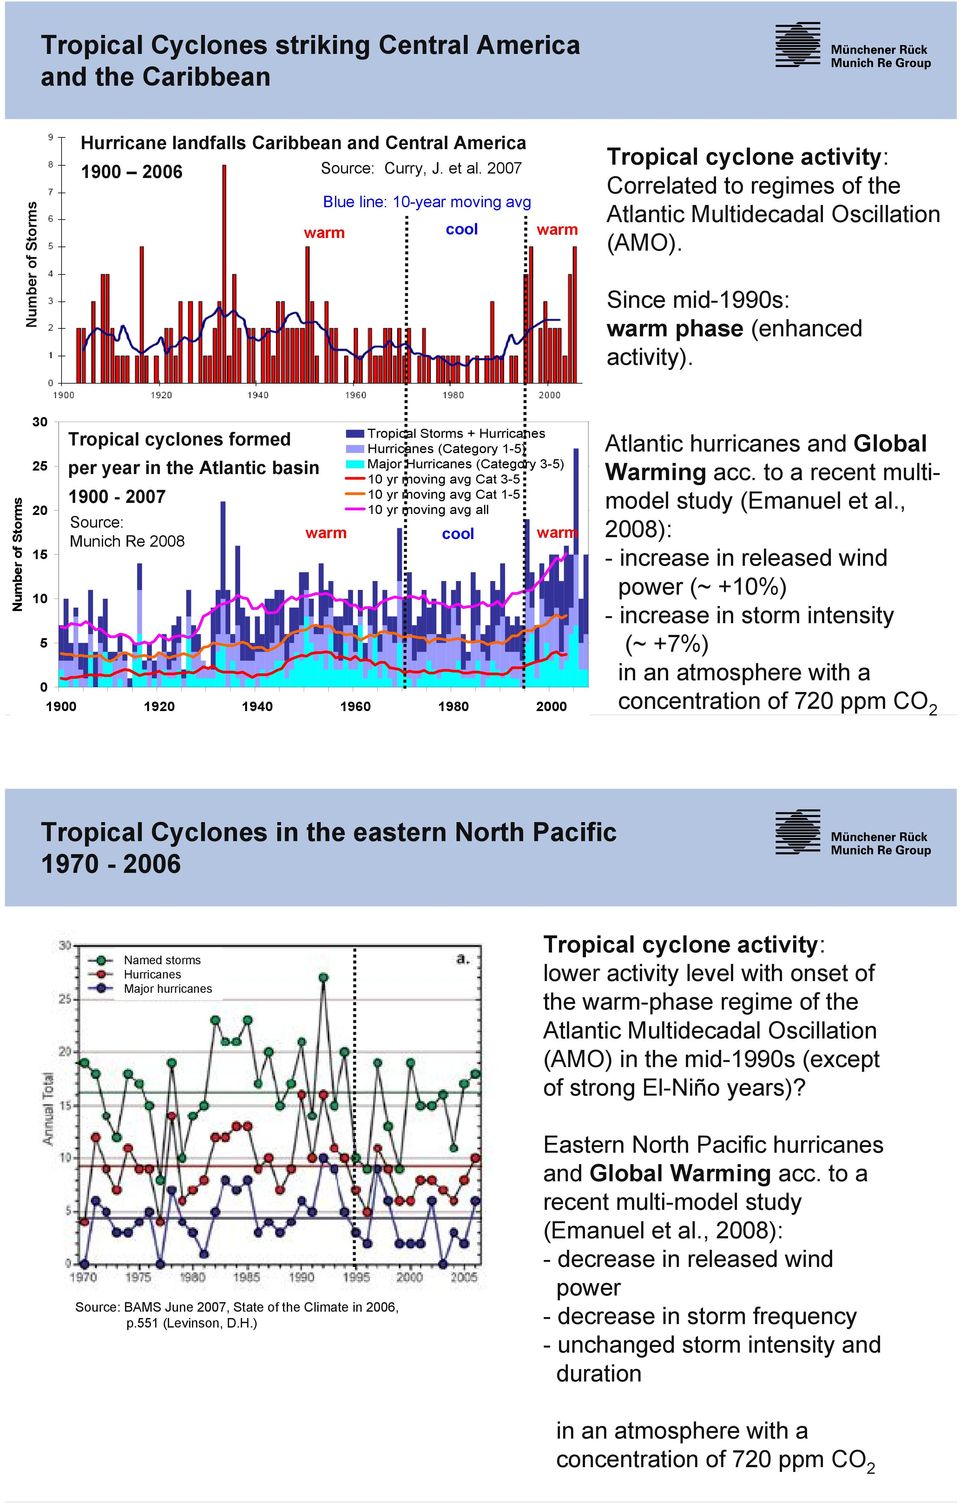 Number of Storms 30 25 20 15 10 5 0 Tropical cyclones formed per year in the Atlantic basin 1900-2007 Source: warm Munich Re 2008 Tropical Storms + Hurricanes Hurricanes (Category 1-5) Major